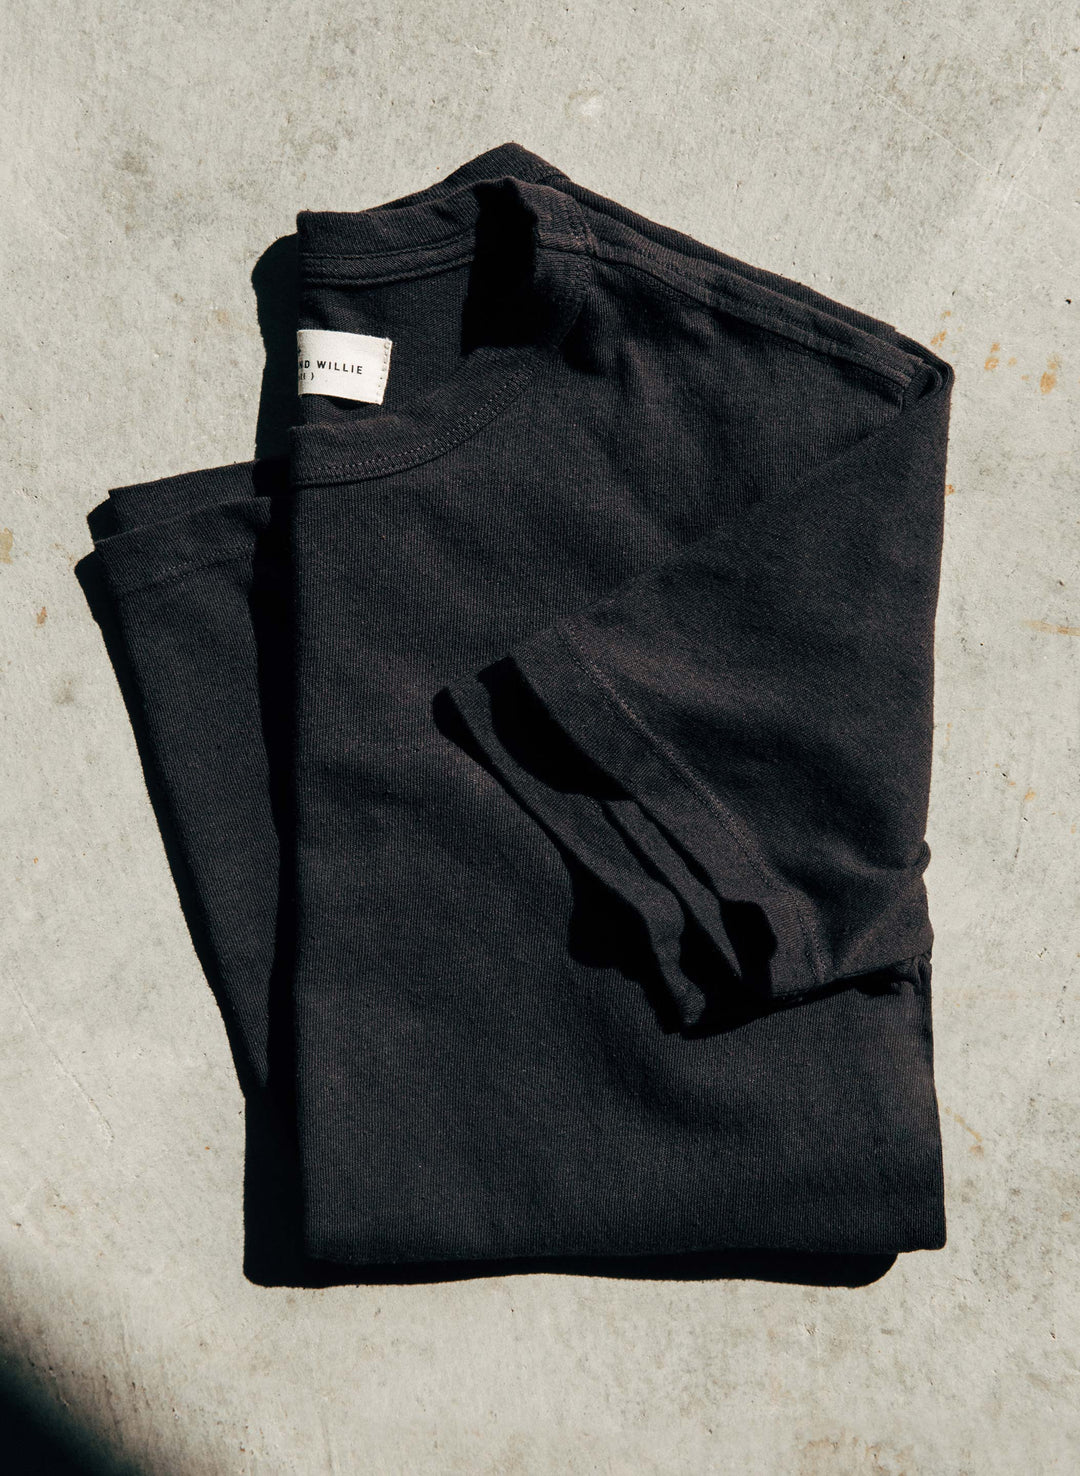 a folded black sweater on a concrete surface